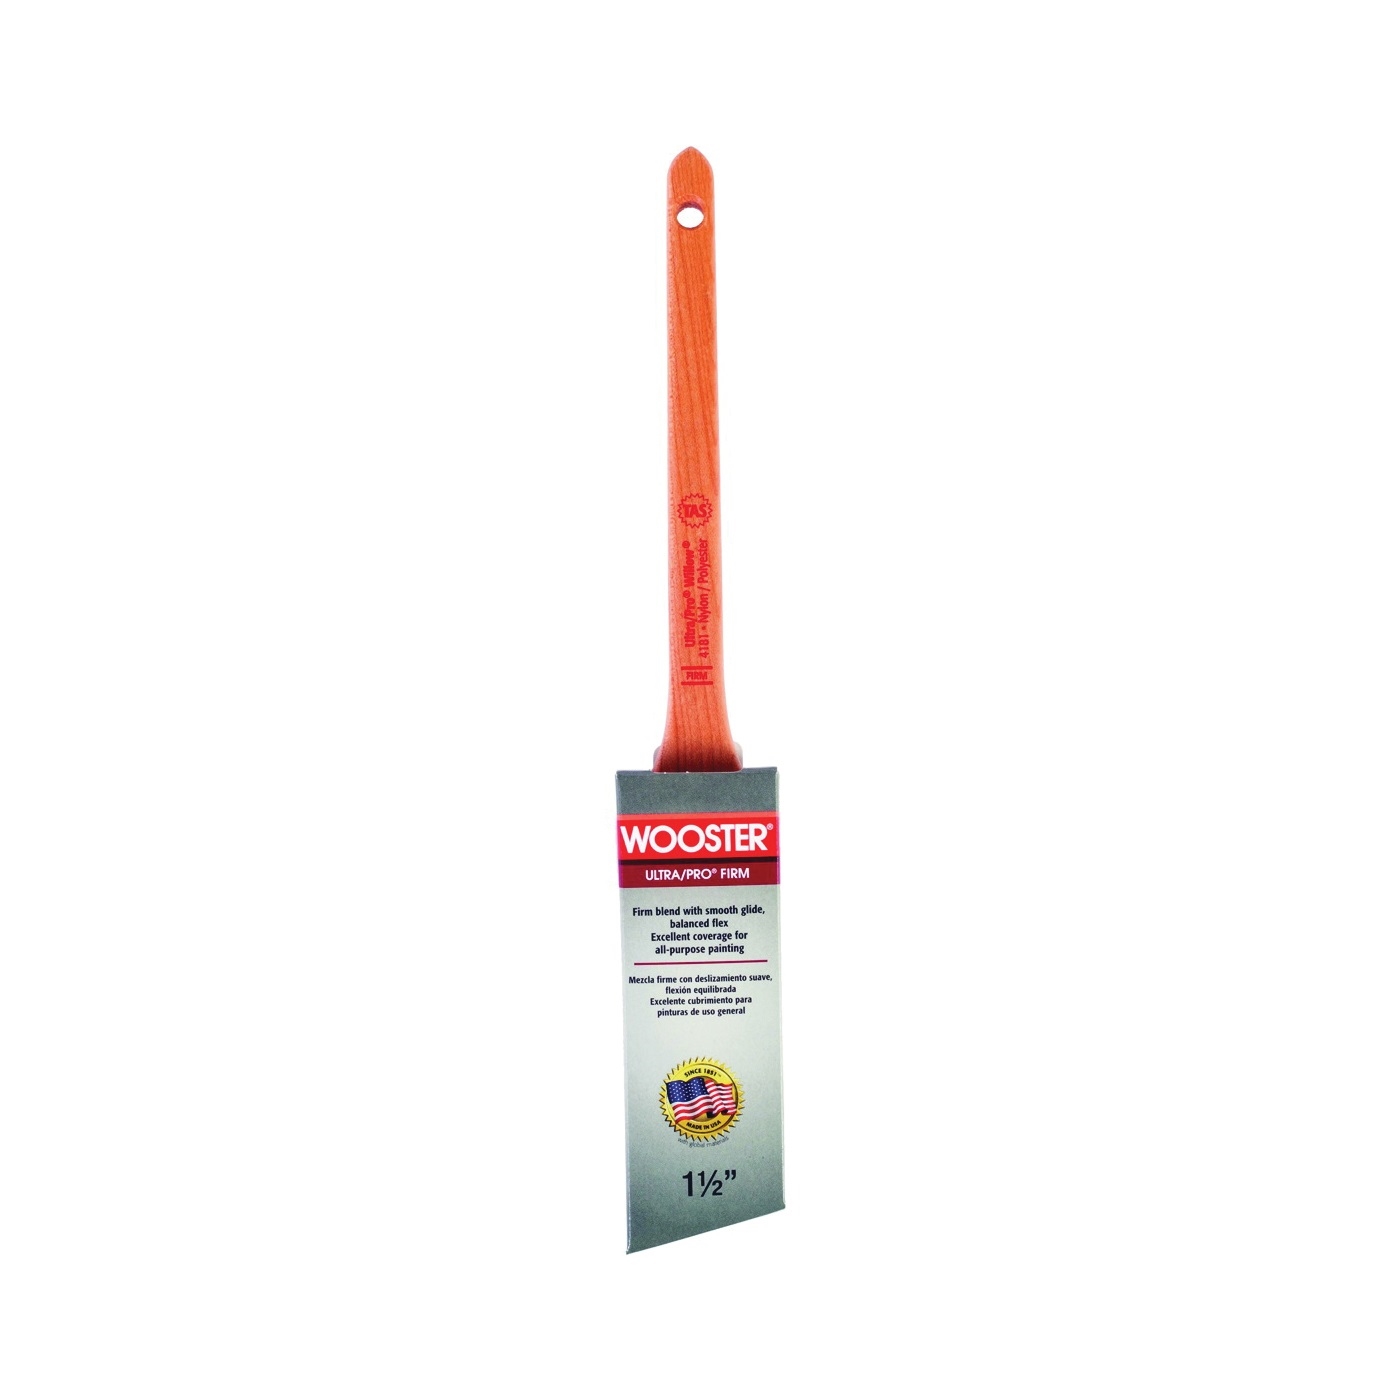 Wooster 4181-1 1/2 Paint Brush, 1-1/2 in W, 2-3/16 in L Bristle, Nylon/Polyester Bristle, Sash Handle